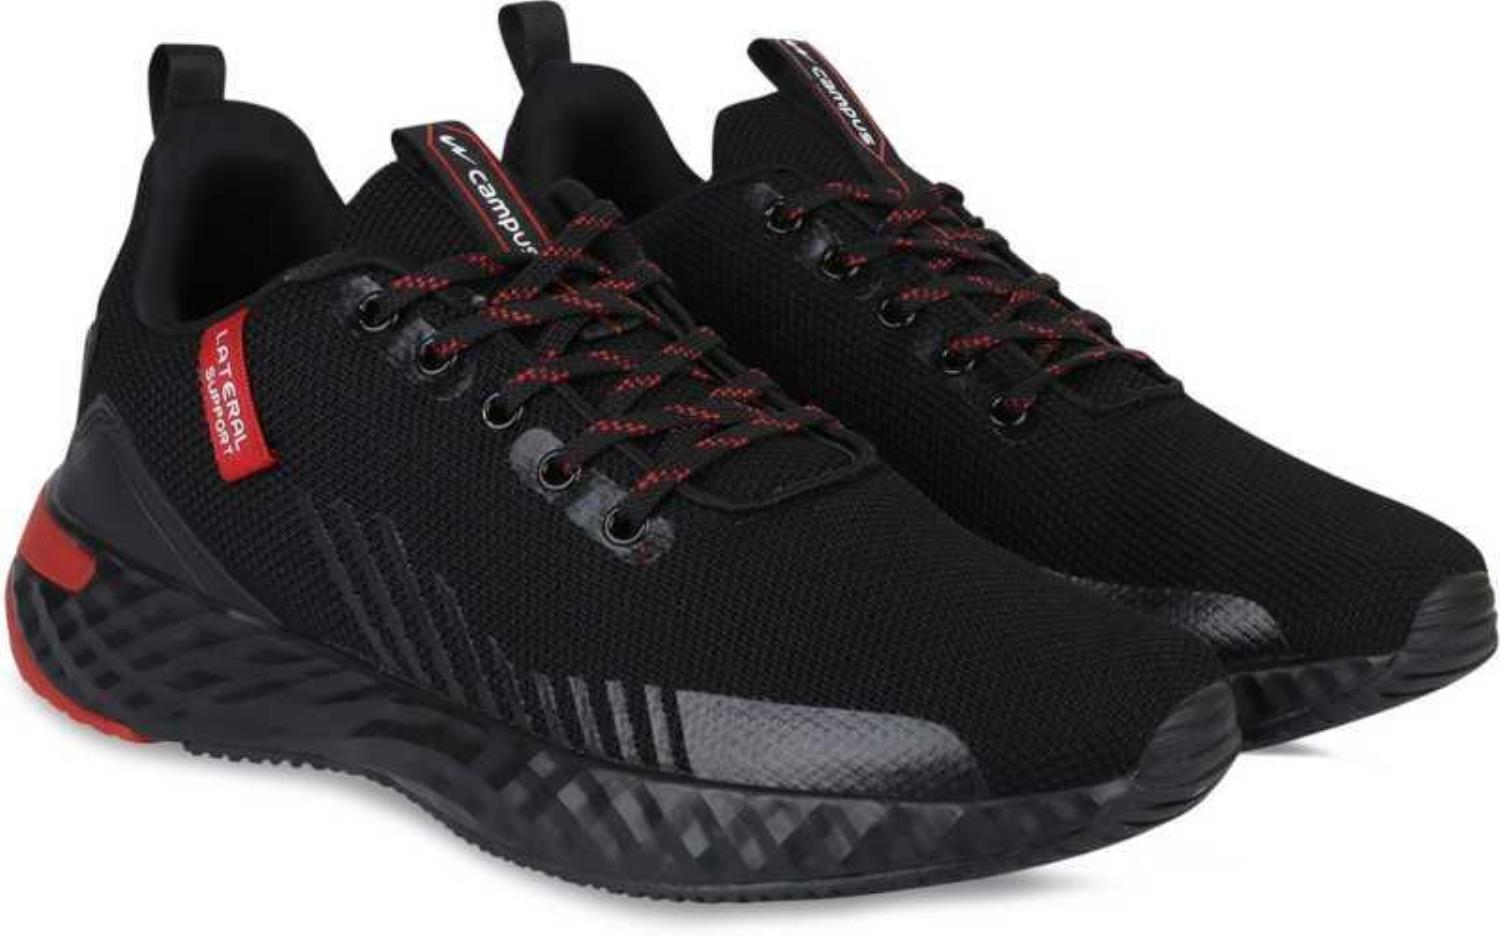 Simba Laced Sports Shoes 5G-816 (Black 